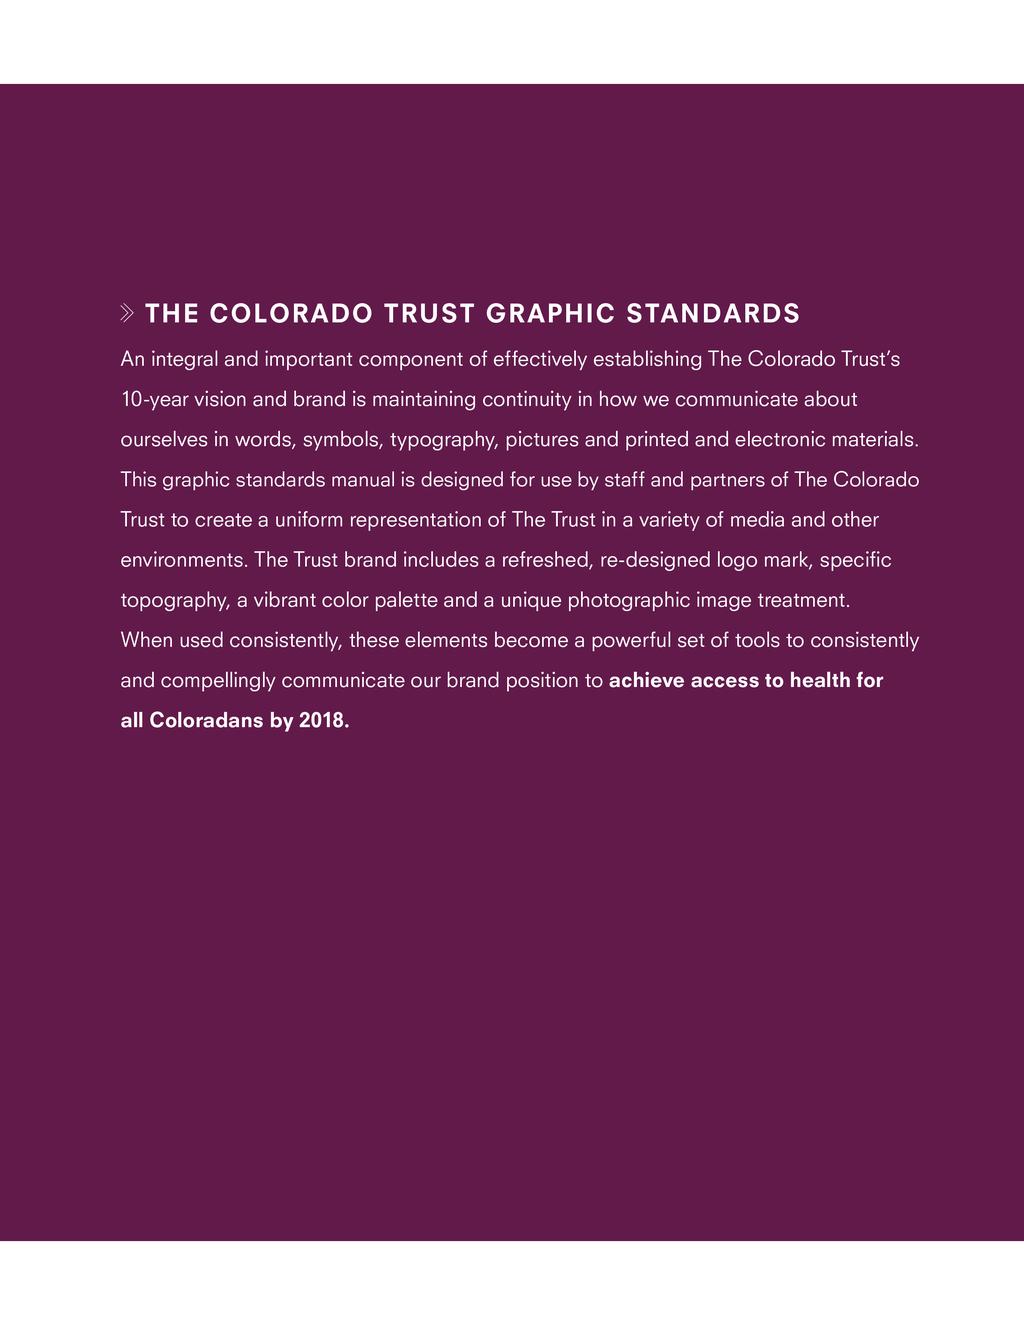 SECTION 3: COLORS THE COLORADO TRUST GRAPHIC STANDARDS An important component of effectively establishing The Colorado Trust s vision and brand is maintaining continuity in how we communicate about